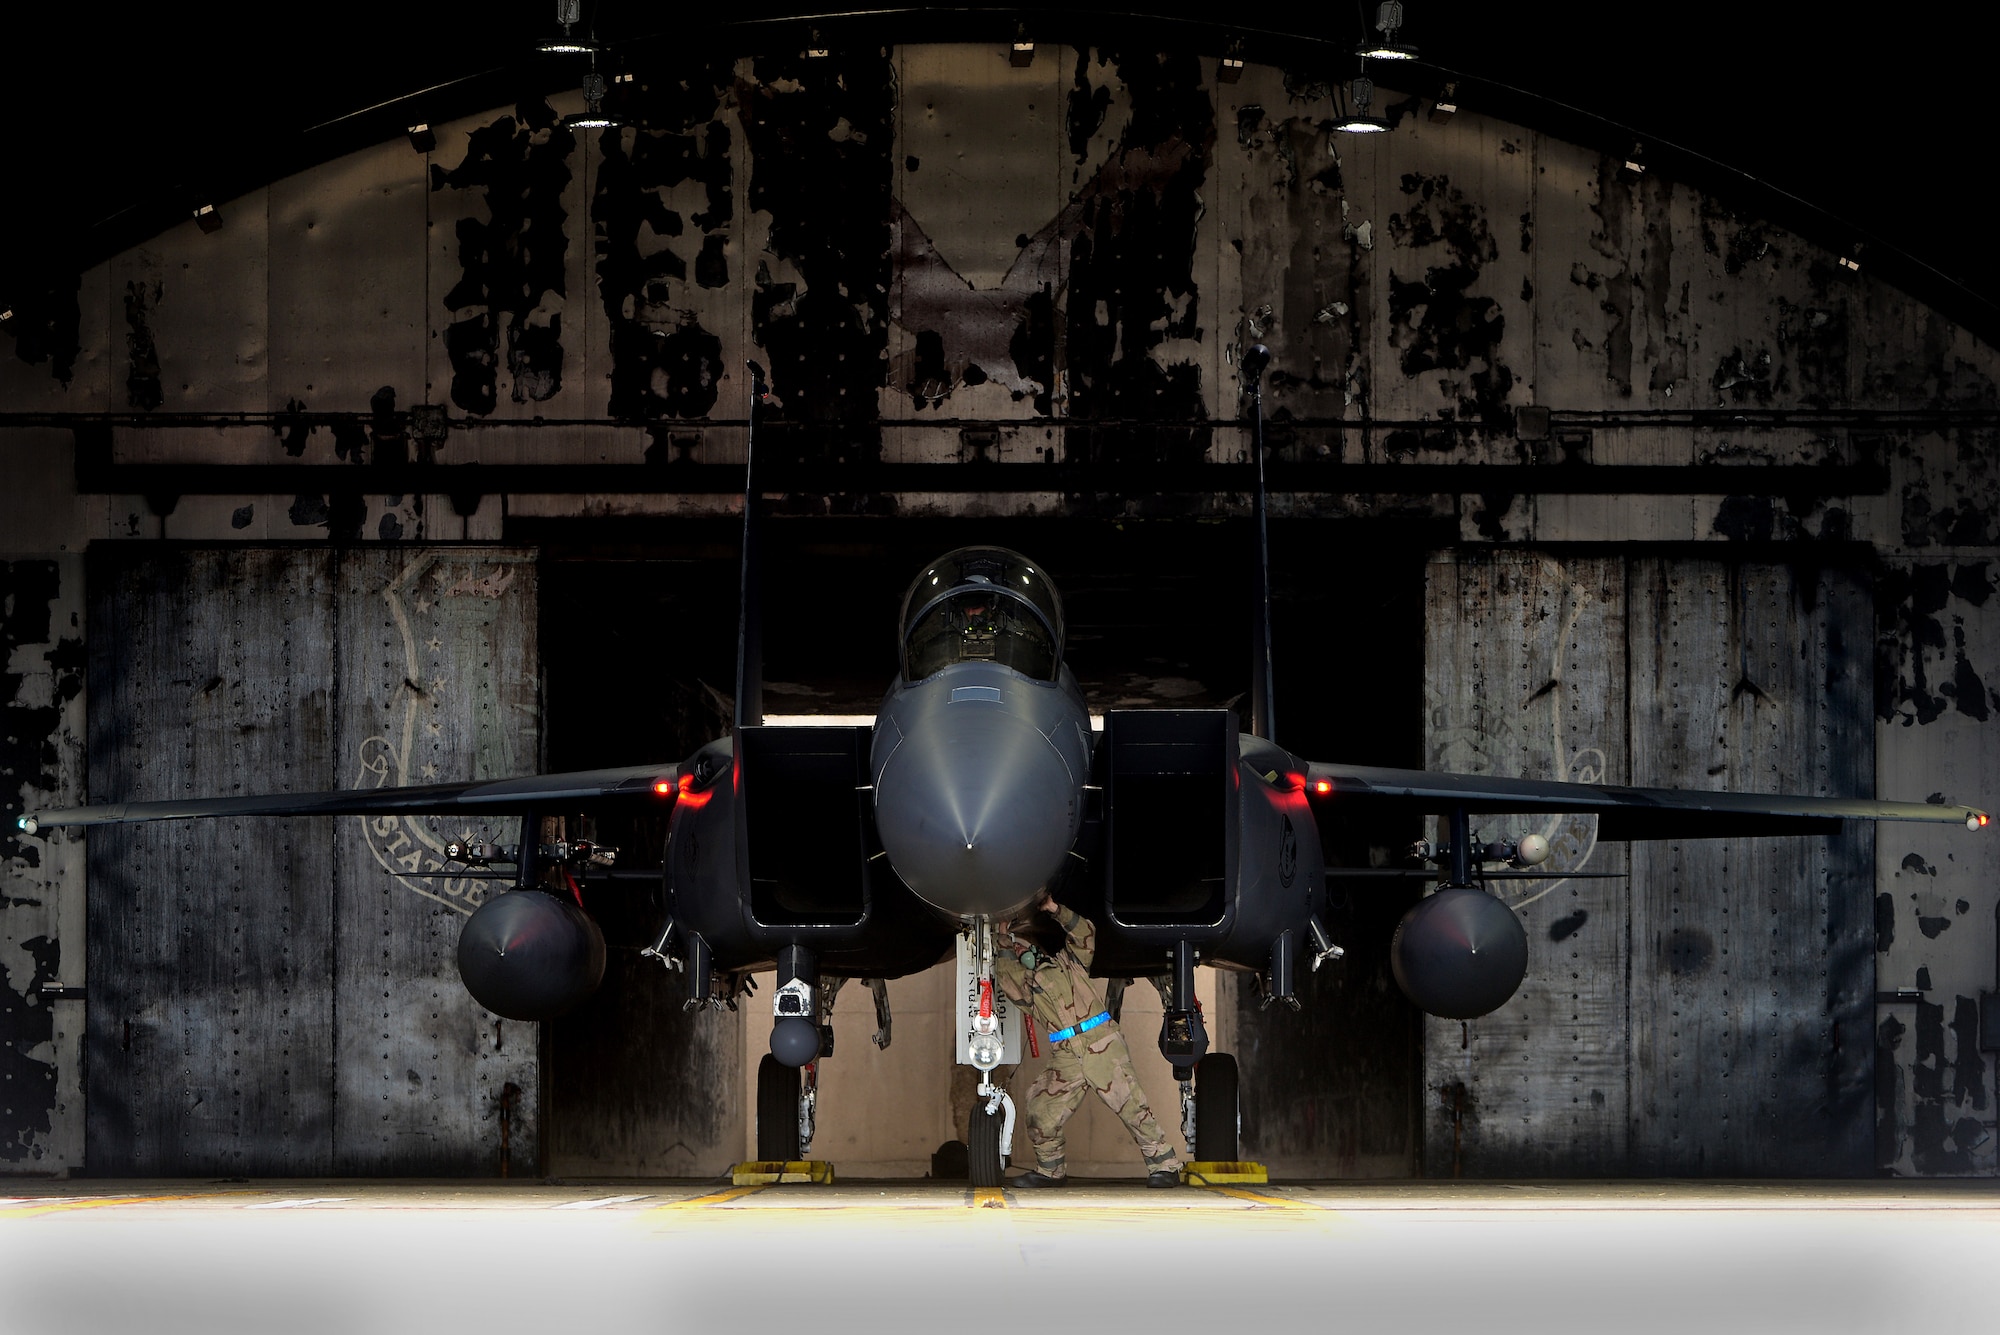 A 48th Fighter Wing maintenance Airman inspects a 492nd Fighter Squadron F-15E Strike Eagle prior to a training sortie during a readiness exercise at Royal Air Force Lakenheath, England, June 5, 2018. Exercise scenarios were designed to emphasize the importance of combat skills effectiveness training and ensure wing Airmen are fully prepared for potential contingencies. (U.S. Air Force photo by Tech. Sgt. Matthew Plew)